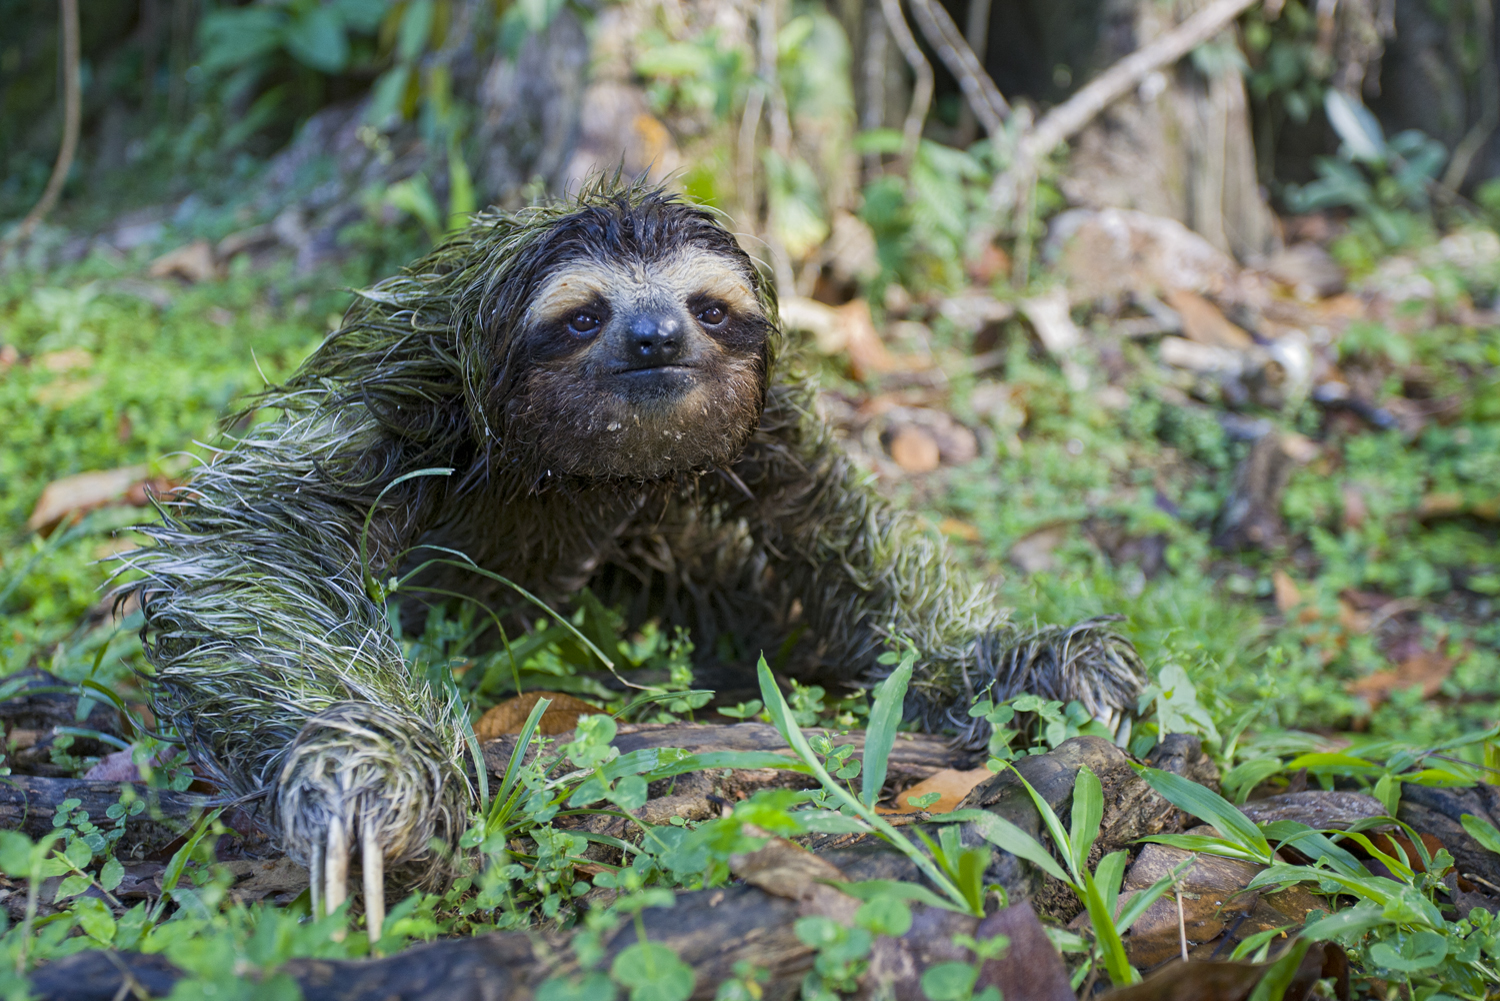 Why Do Sloths Poop on the Ground? | The Sloth Conservation Foundation